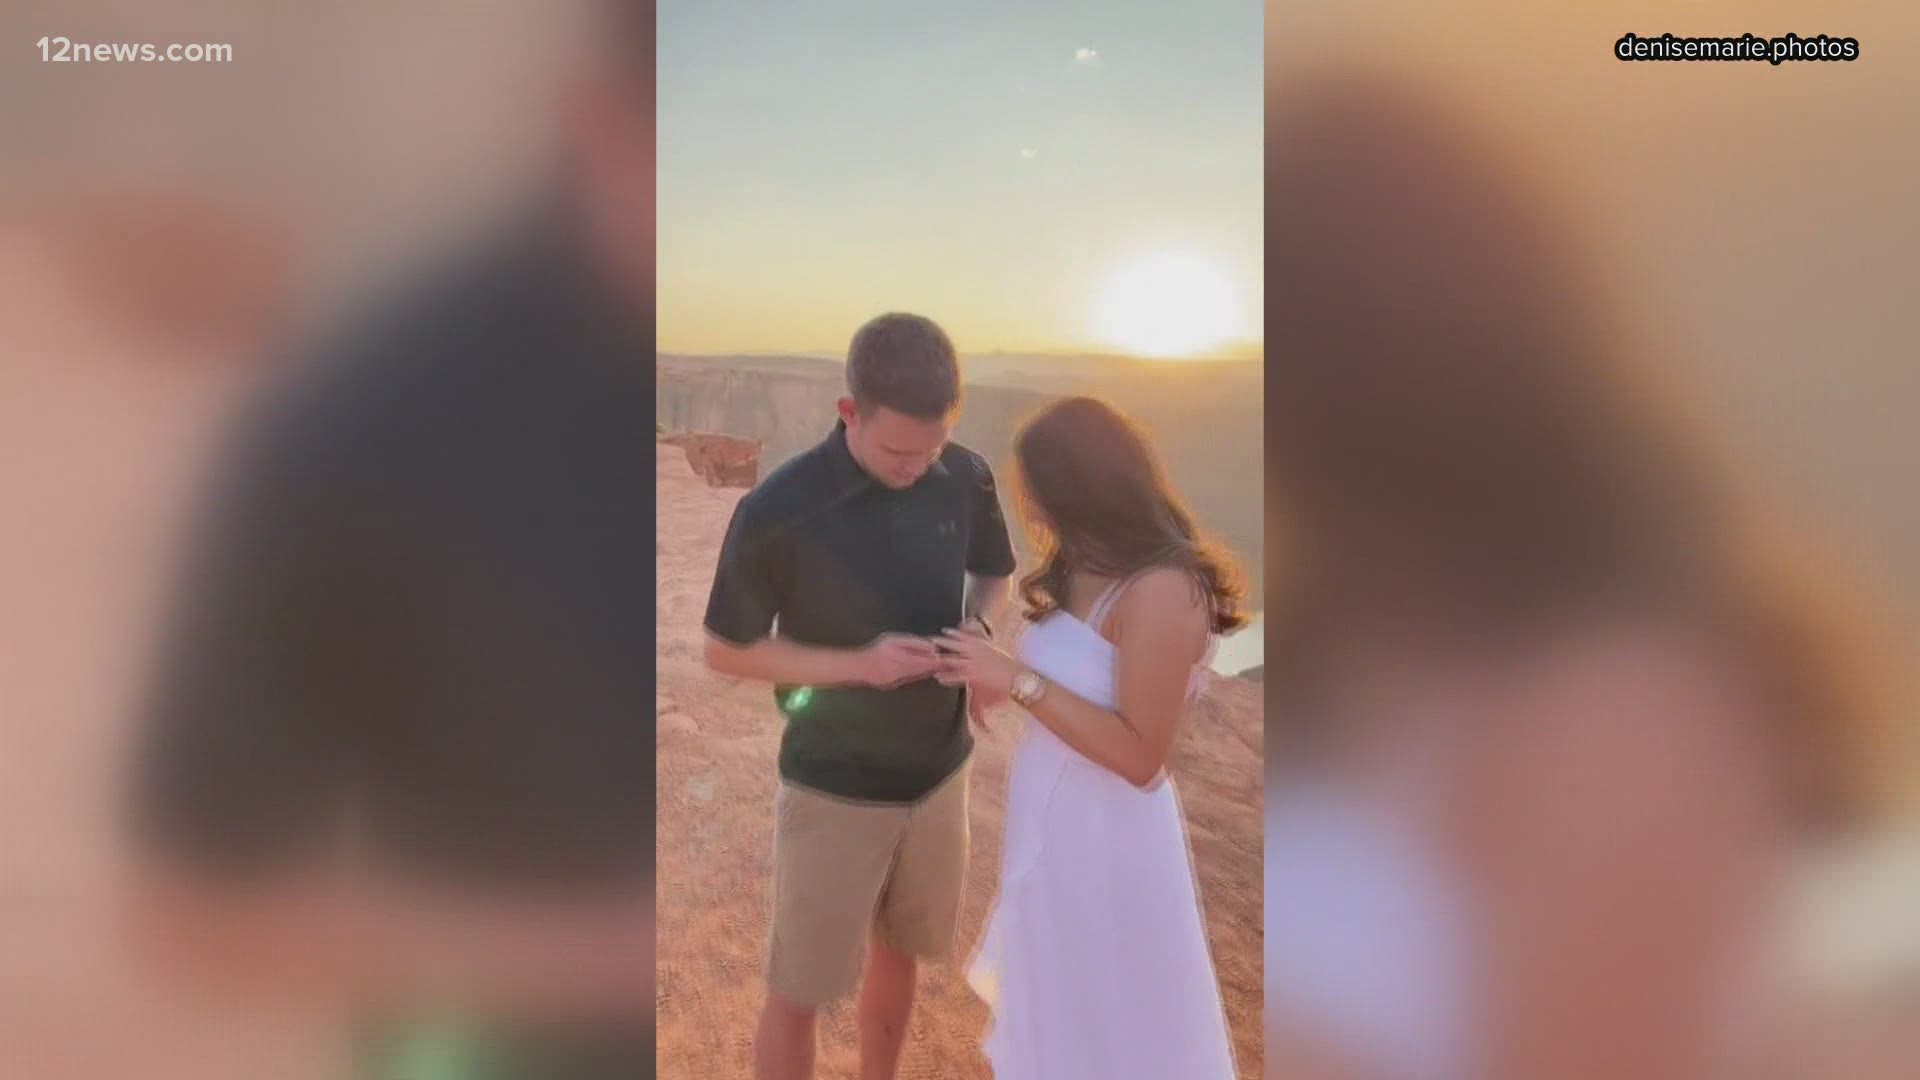 You'll want to see this beautiful proposal at Horseshoe Bend, which recently went viral on TikTok.